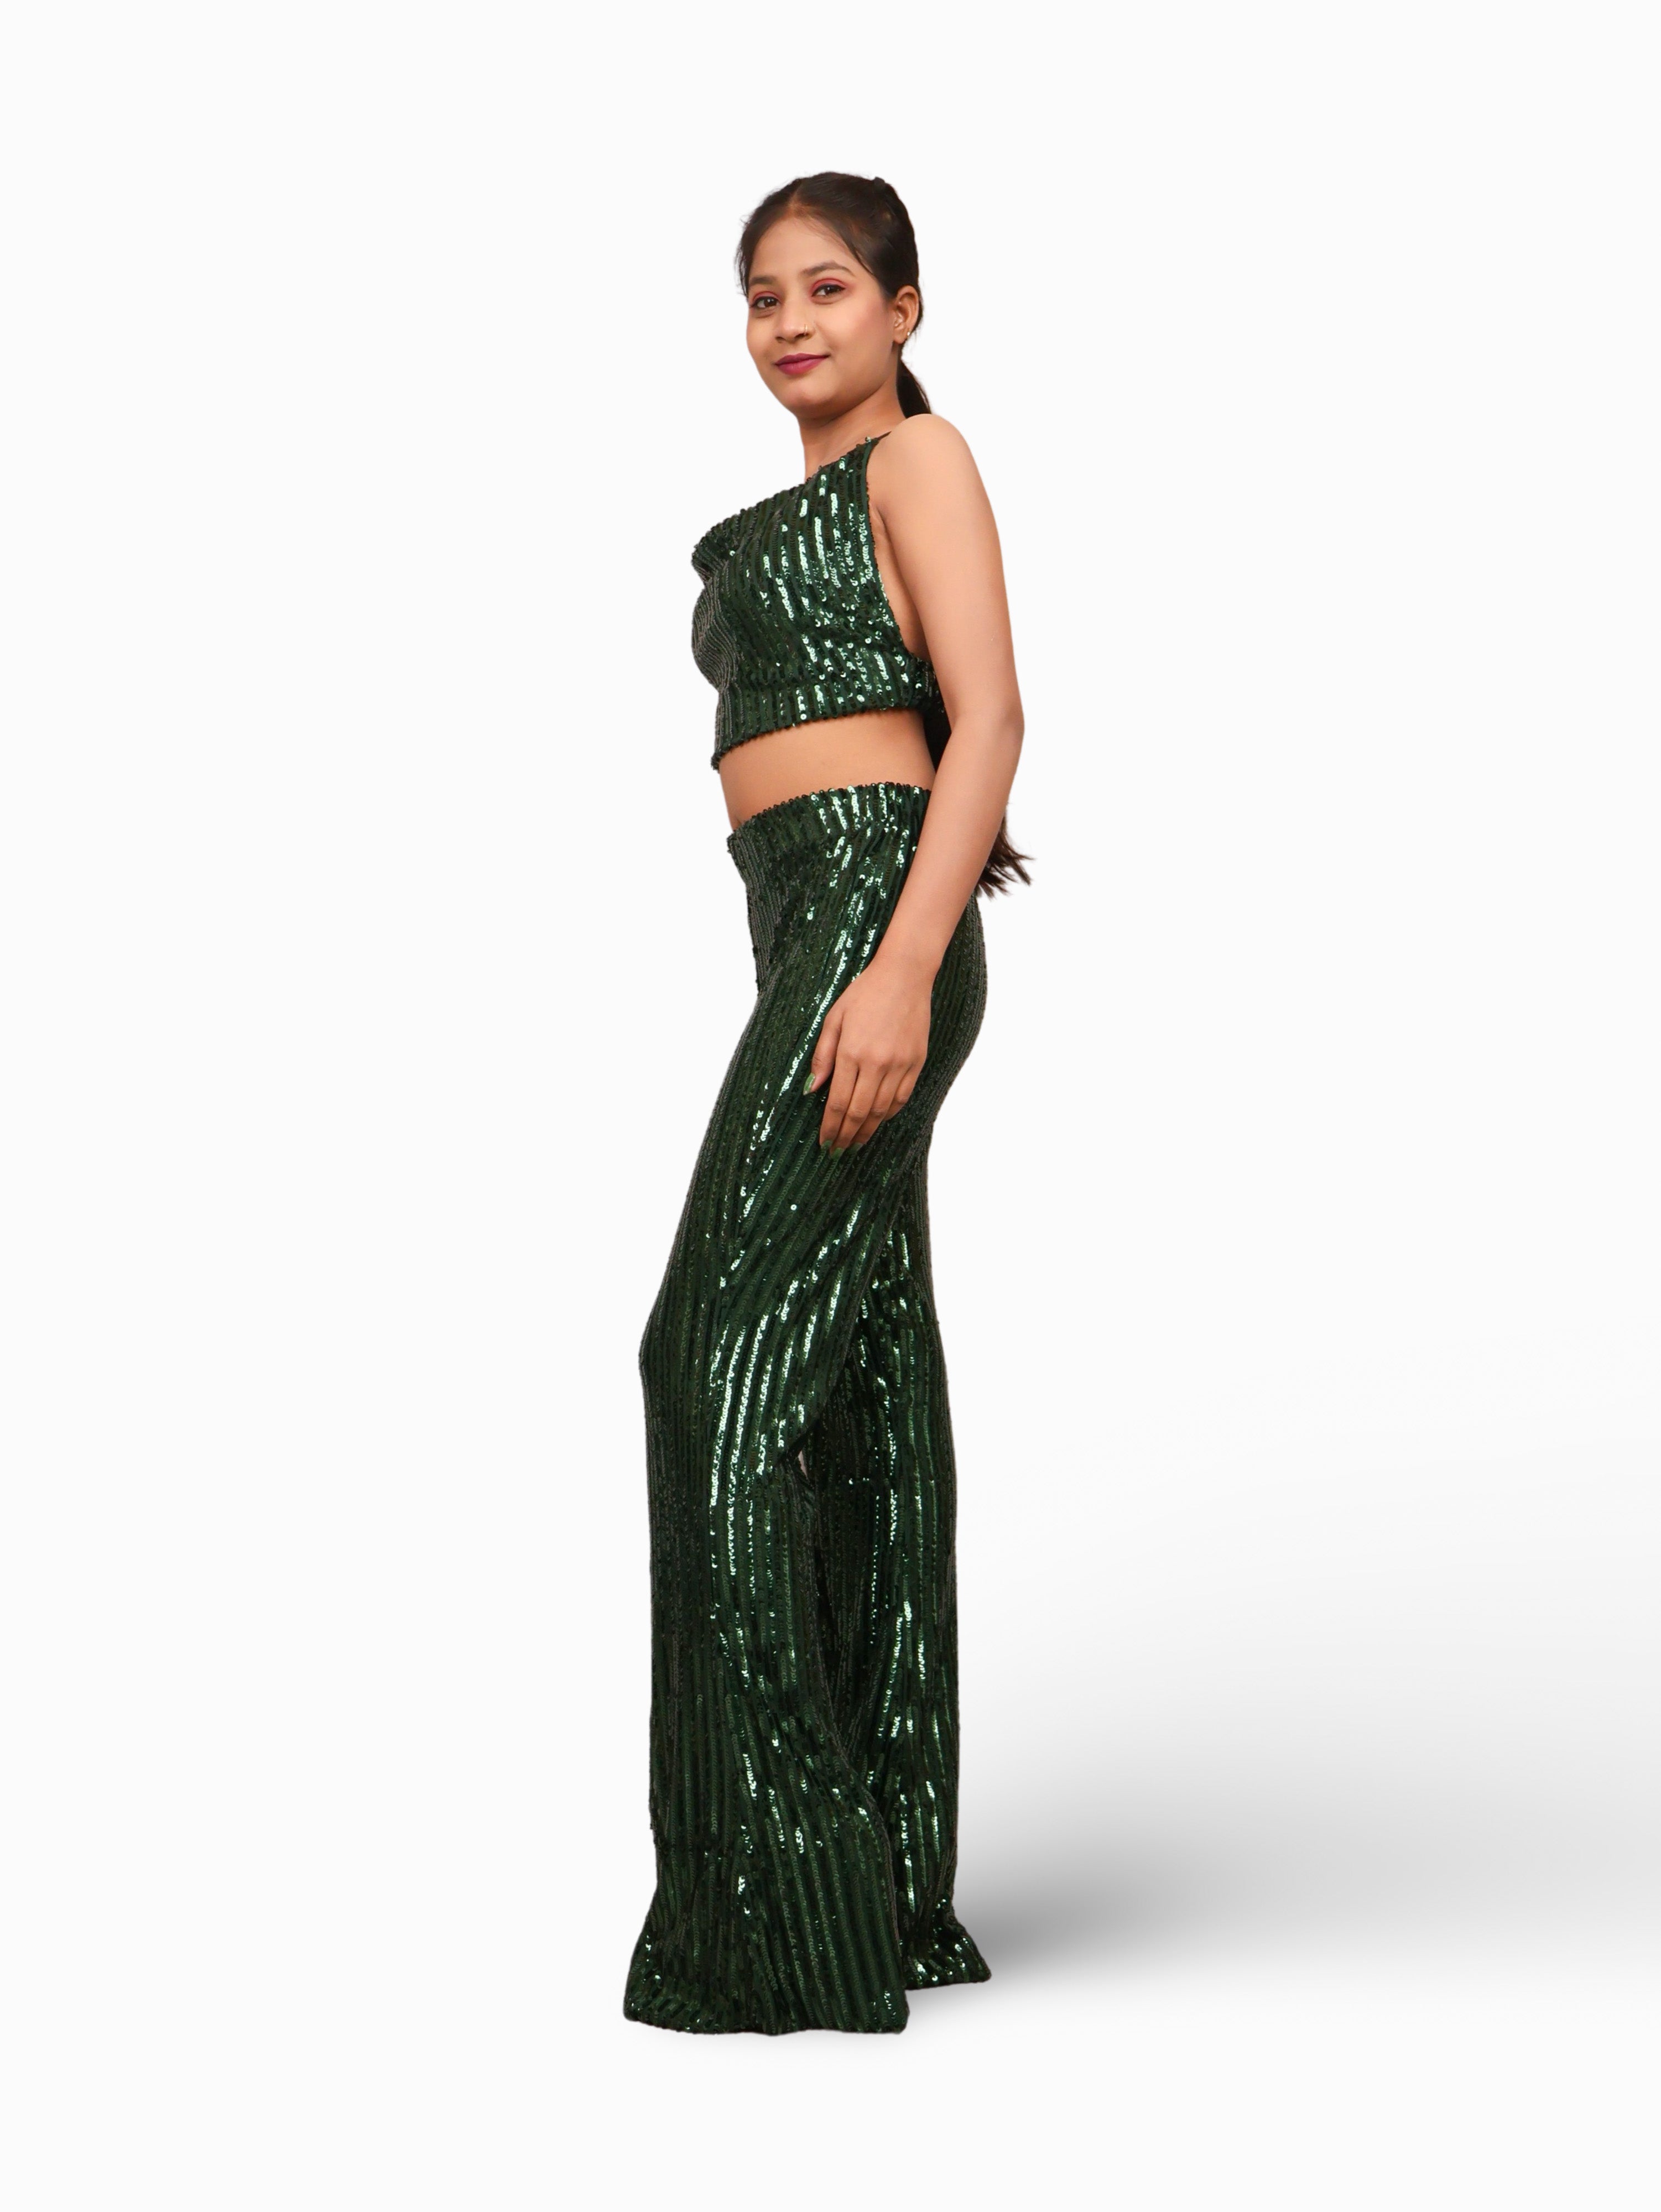 Sequins Spaghetti Neck Co-Ord Set by Shreekama Dark Green Dress for Party Festival Wedding Occasion in Noida